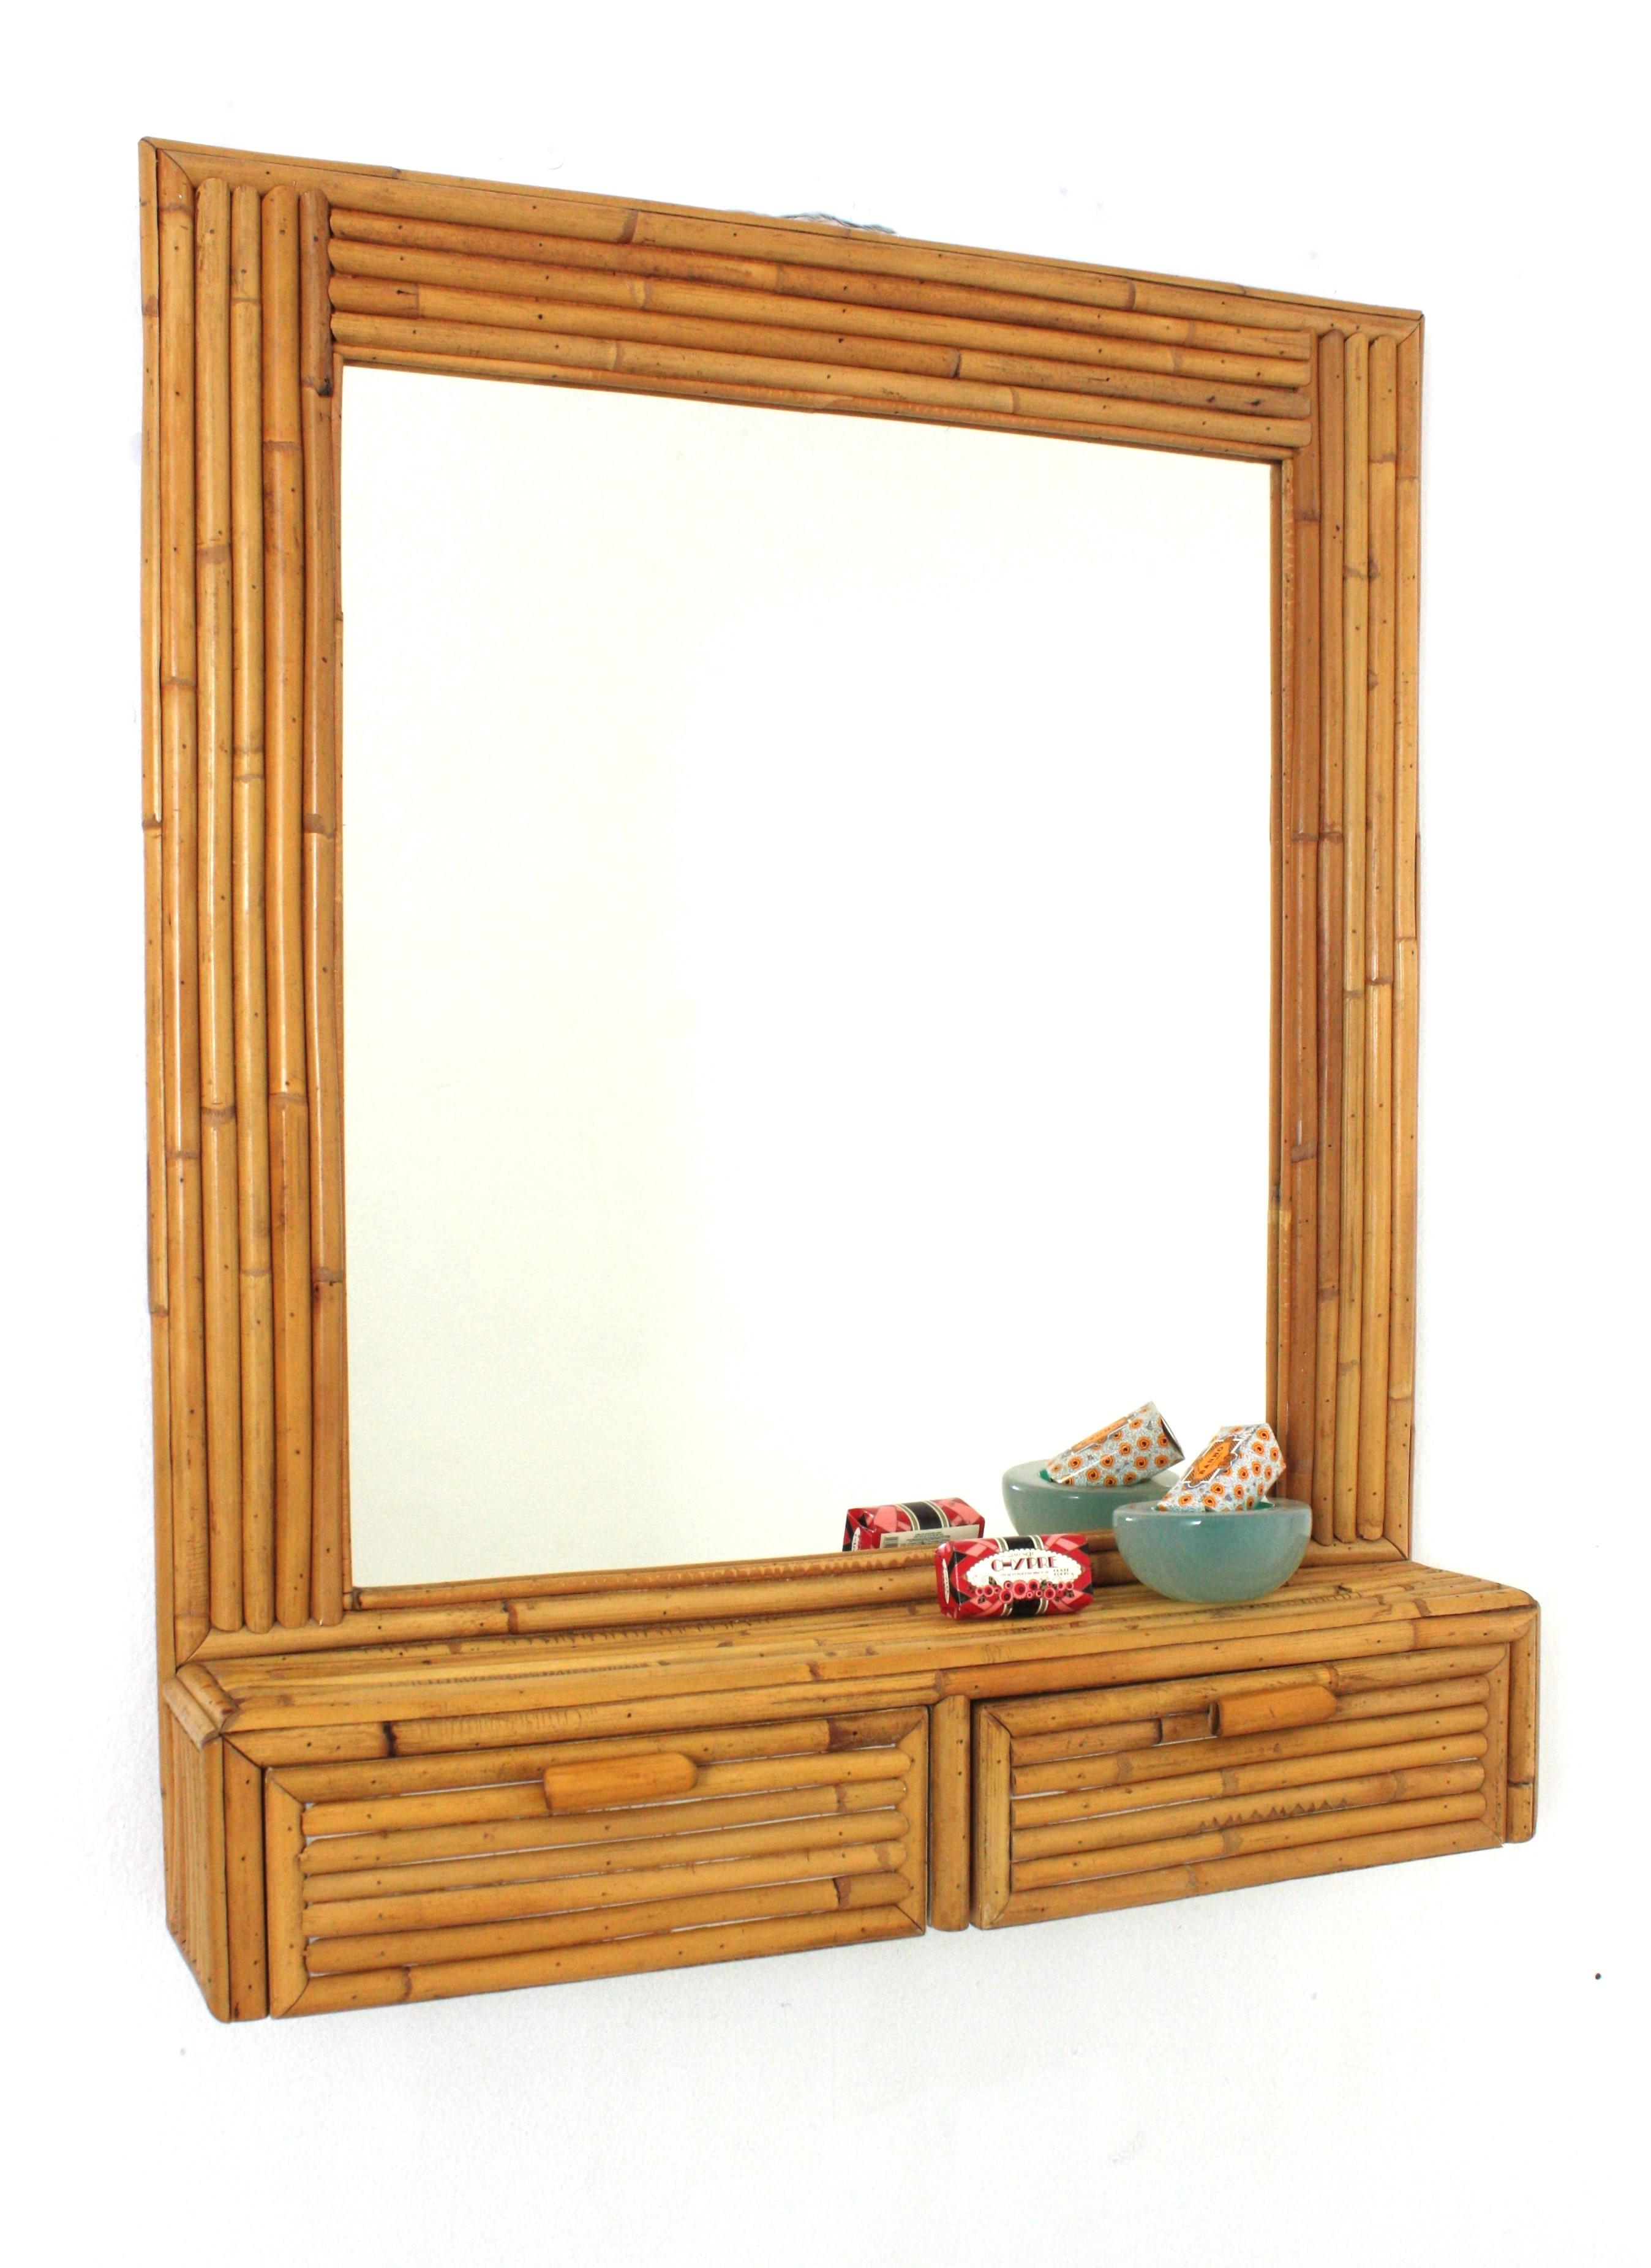 Midcentury Rectangular wall mirror with shelf, split reed, bamboo, rattan, Italy, 1960s.
This eyecatching mirror with storage drawers was handcrafted with bamboo cane and rattan.

It will be a nice addition to be used in a bathroom or as wall mirror